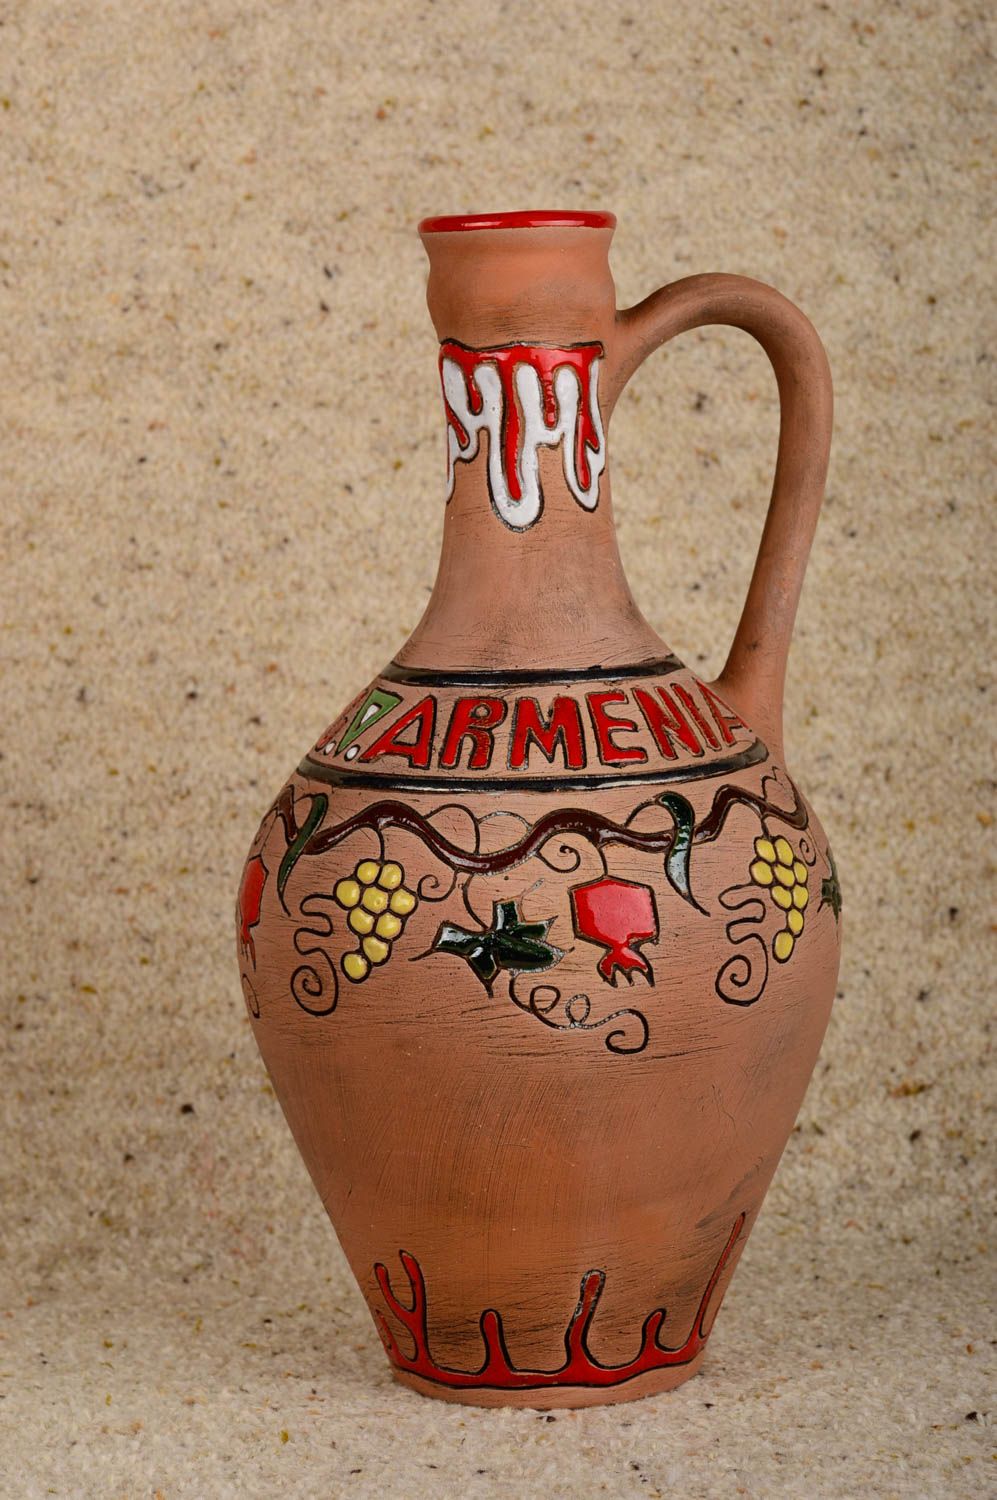 60 oz ceramic wine classic form pitcher with handle from Armenia 11,1,7 lb photo 1